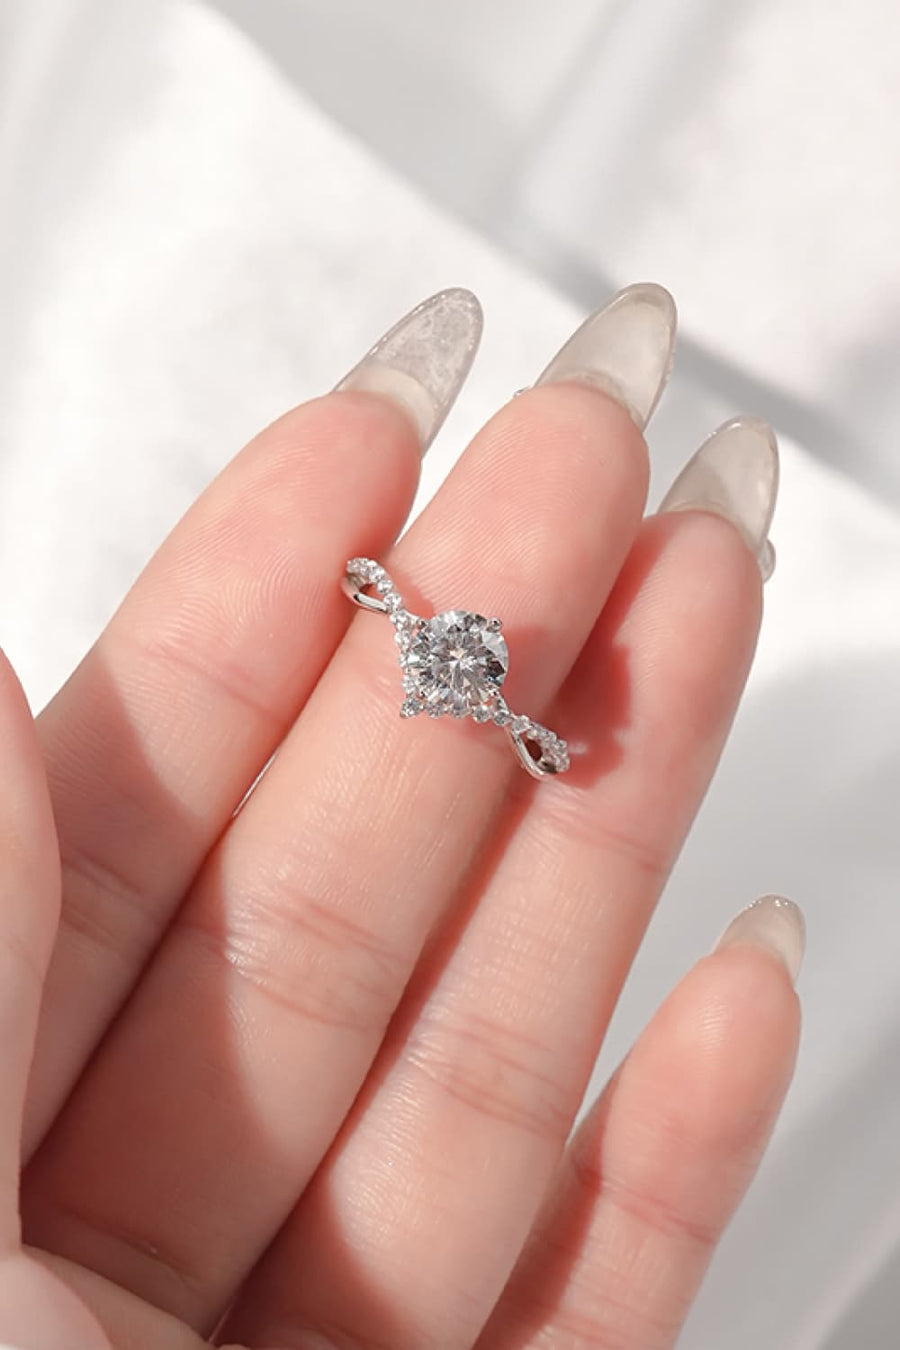 1 Carat Moissanite Ring, Sterling Silver Ring, Moissanite Solitaire Ring, Sparkling Gemstone Ring, Ethical Jewelry, Luxurious Silver Ring, Elegant Moissanite Jewelry, Timeless Solitaire Design, Affordable Luxury Ring, Statement Moissanite Ring.